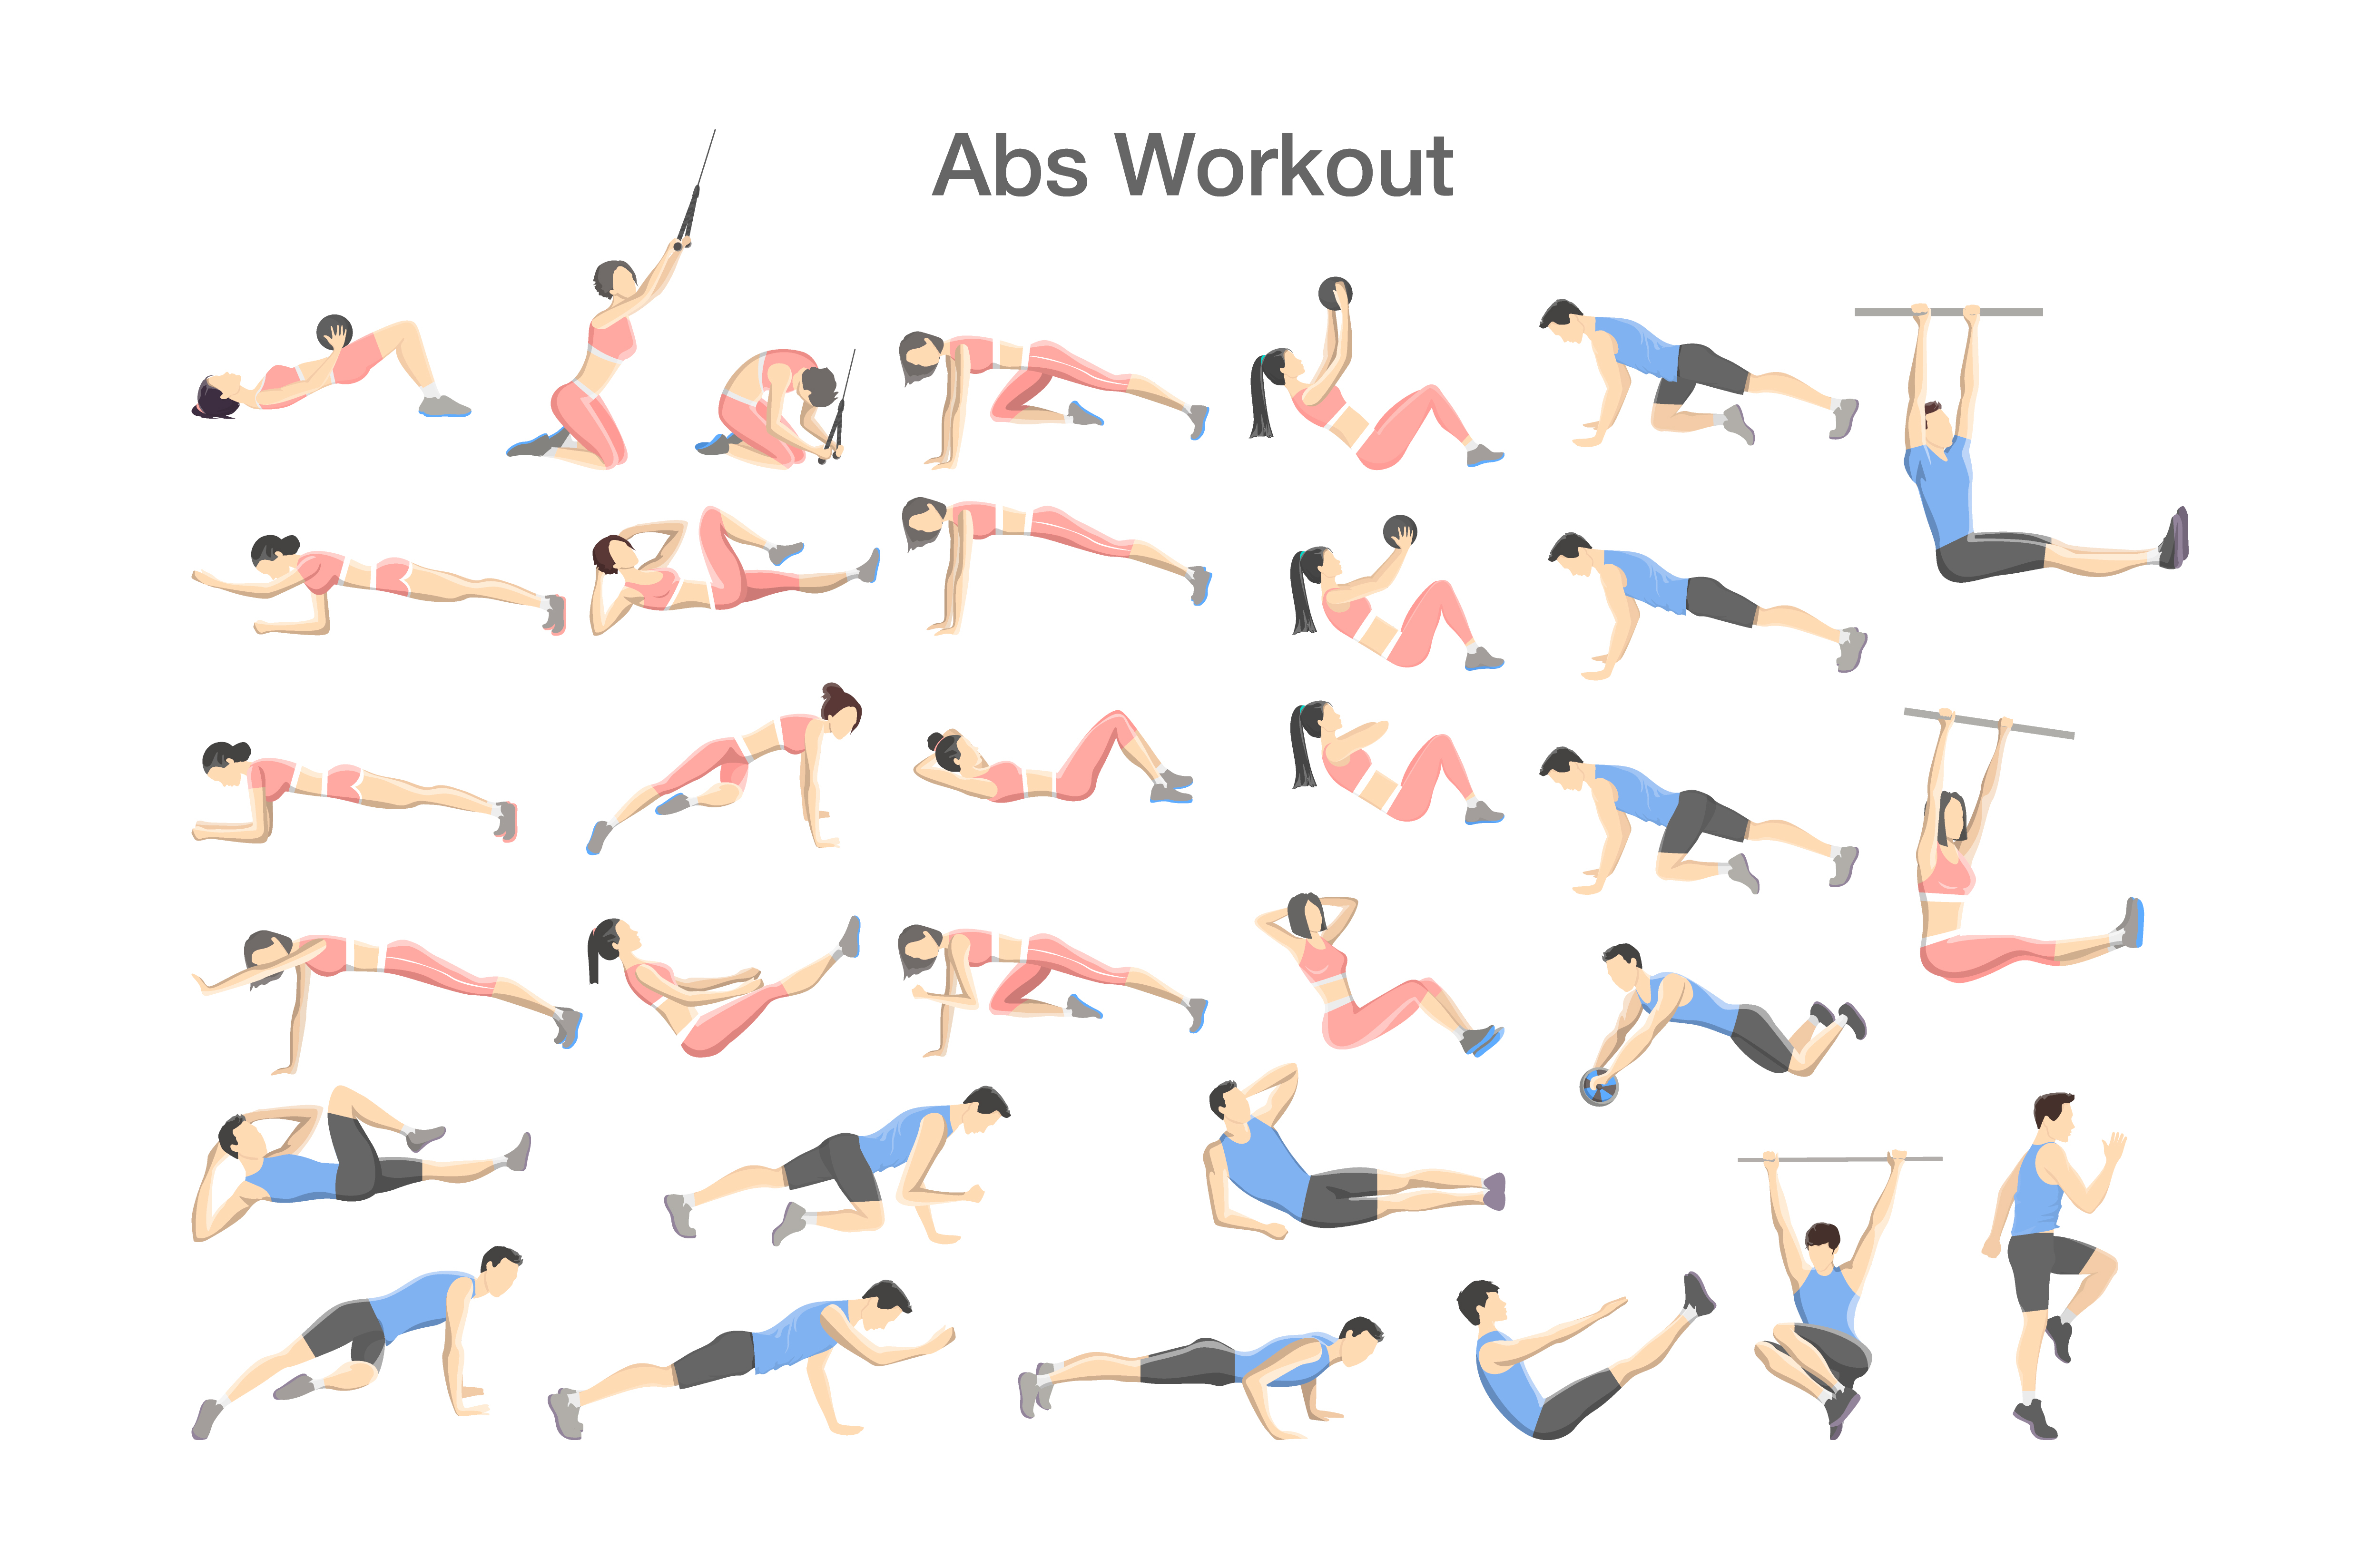 There are many other exercises for ABS - which is your favourite one?